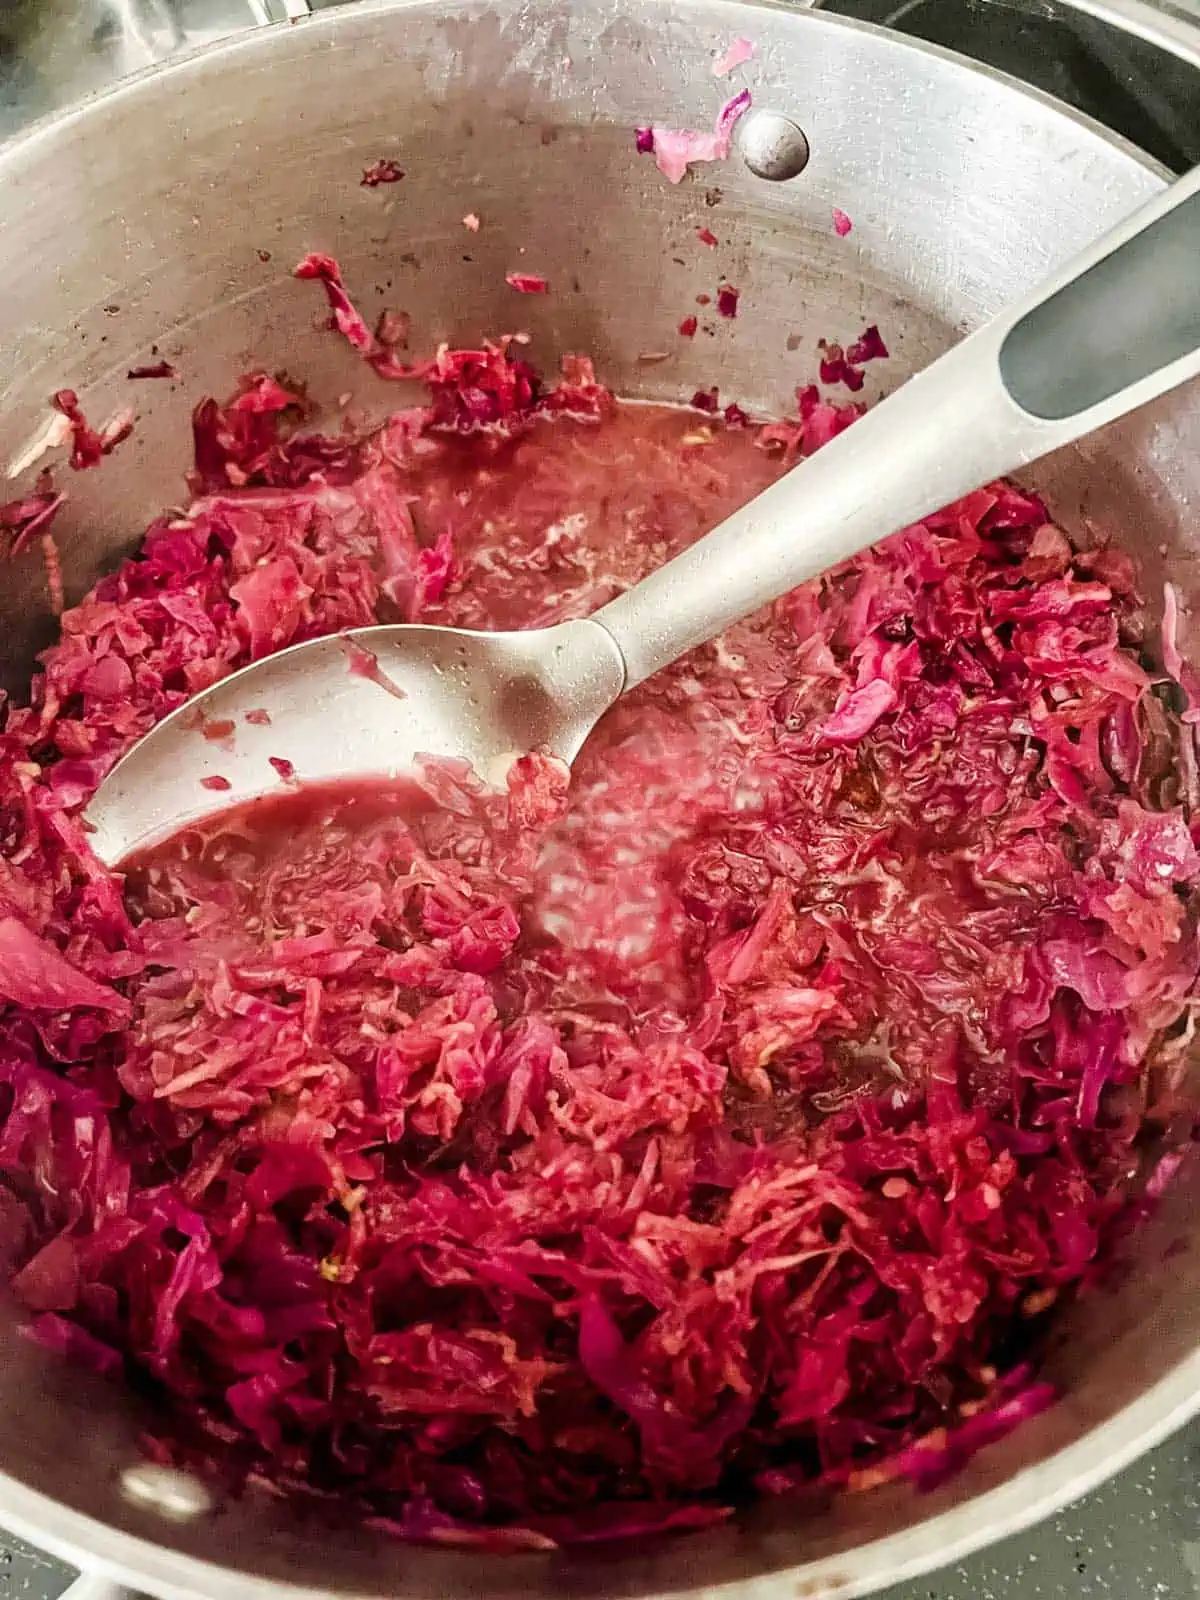 Photo of cooked braised red cabbage.